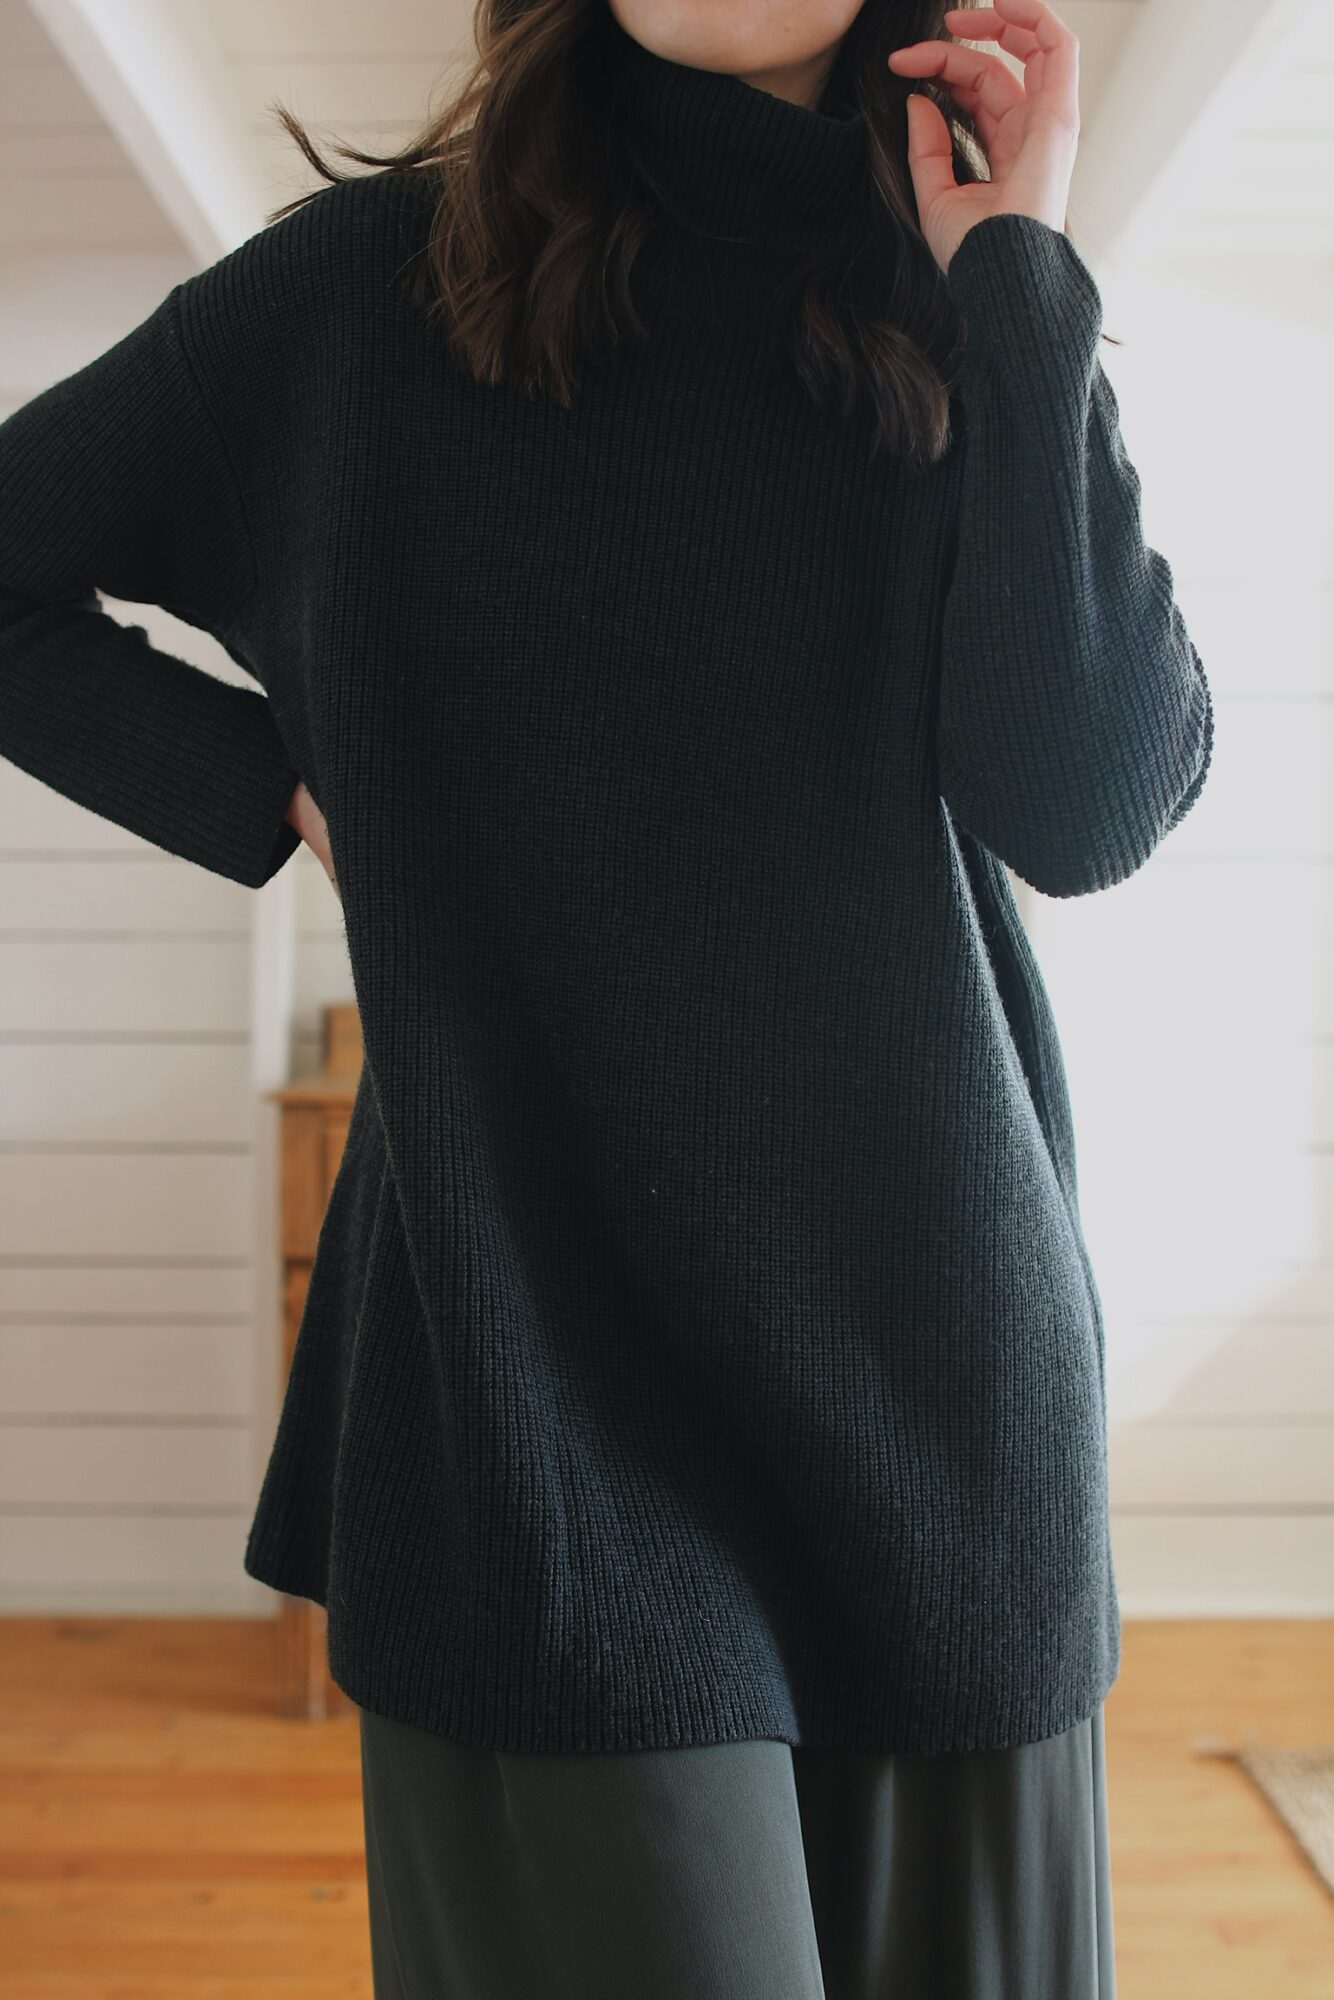 How to Wear a Black Tunic Sweater – Just Posted